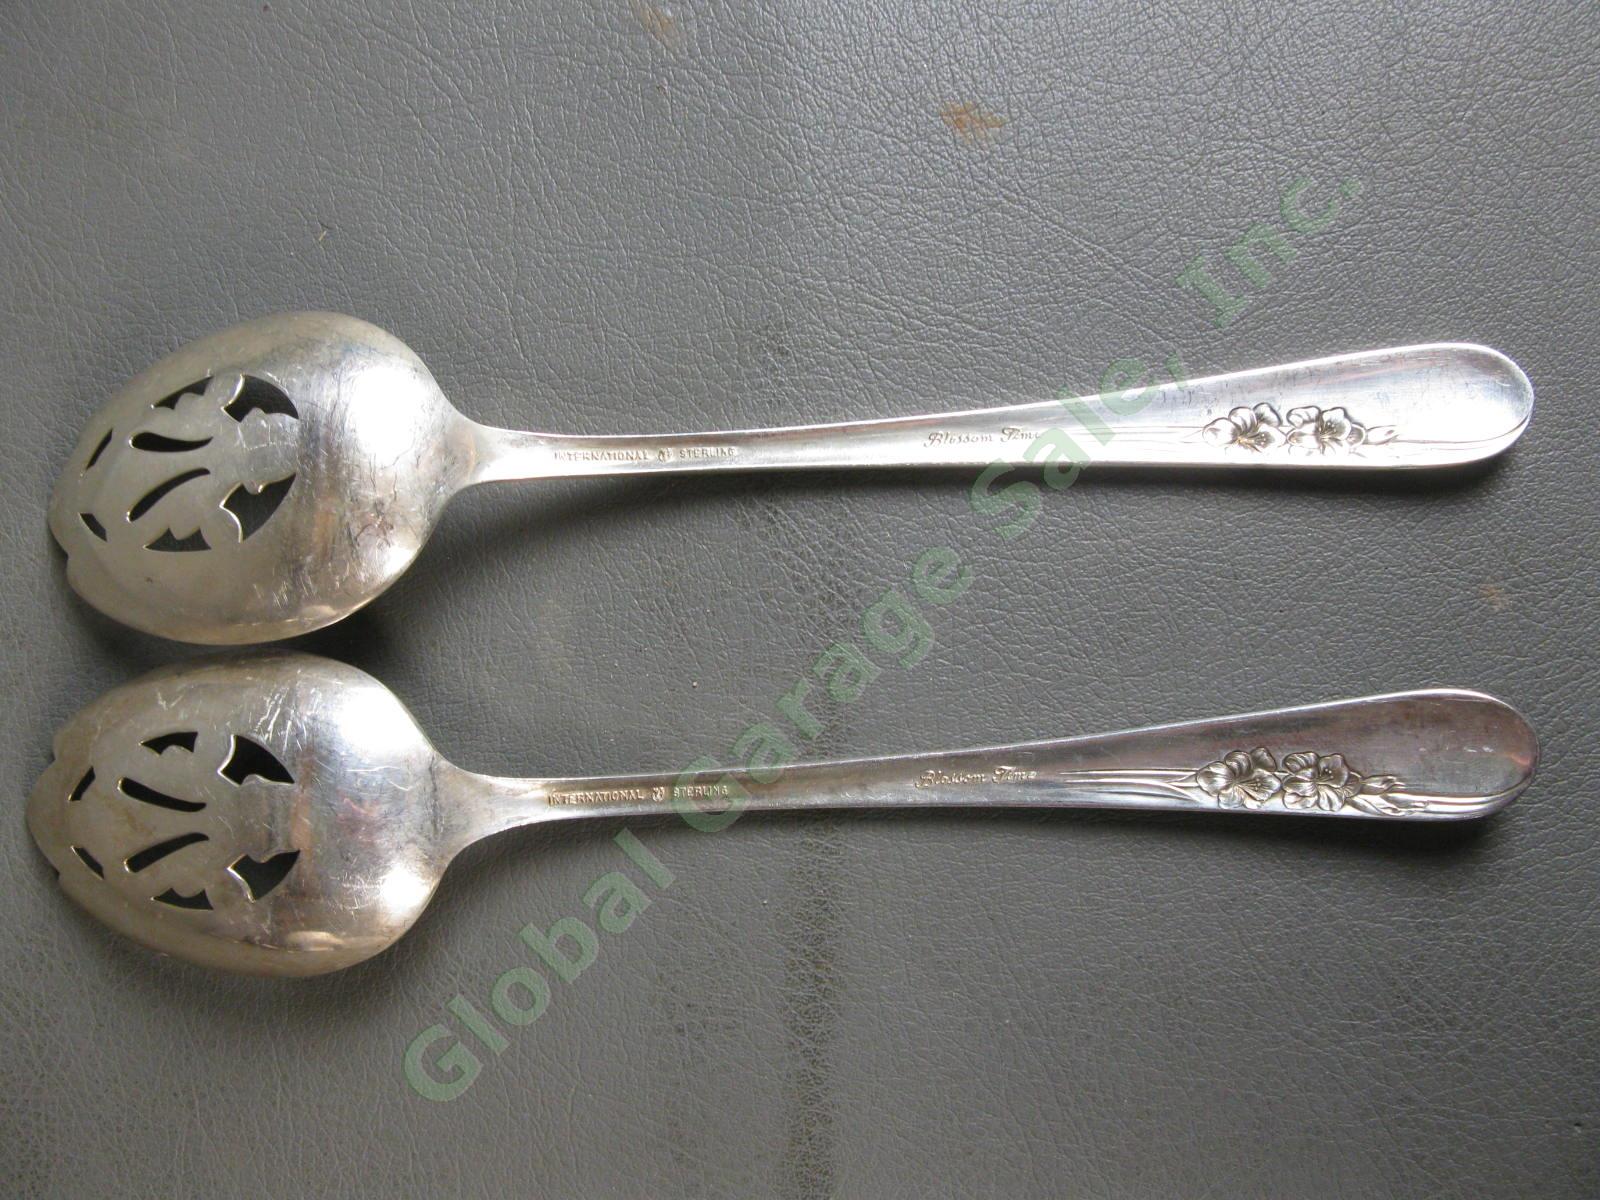 2 International Sterling Silver Blossom Time Pierced Serving Spoon Set Pair 124g 3